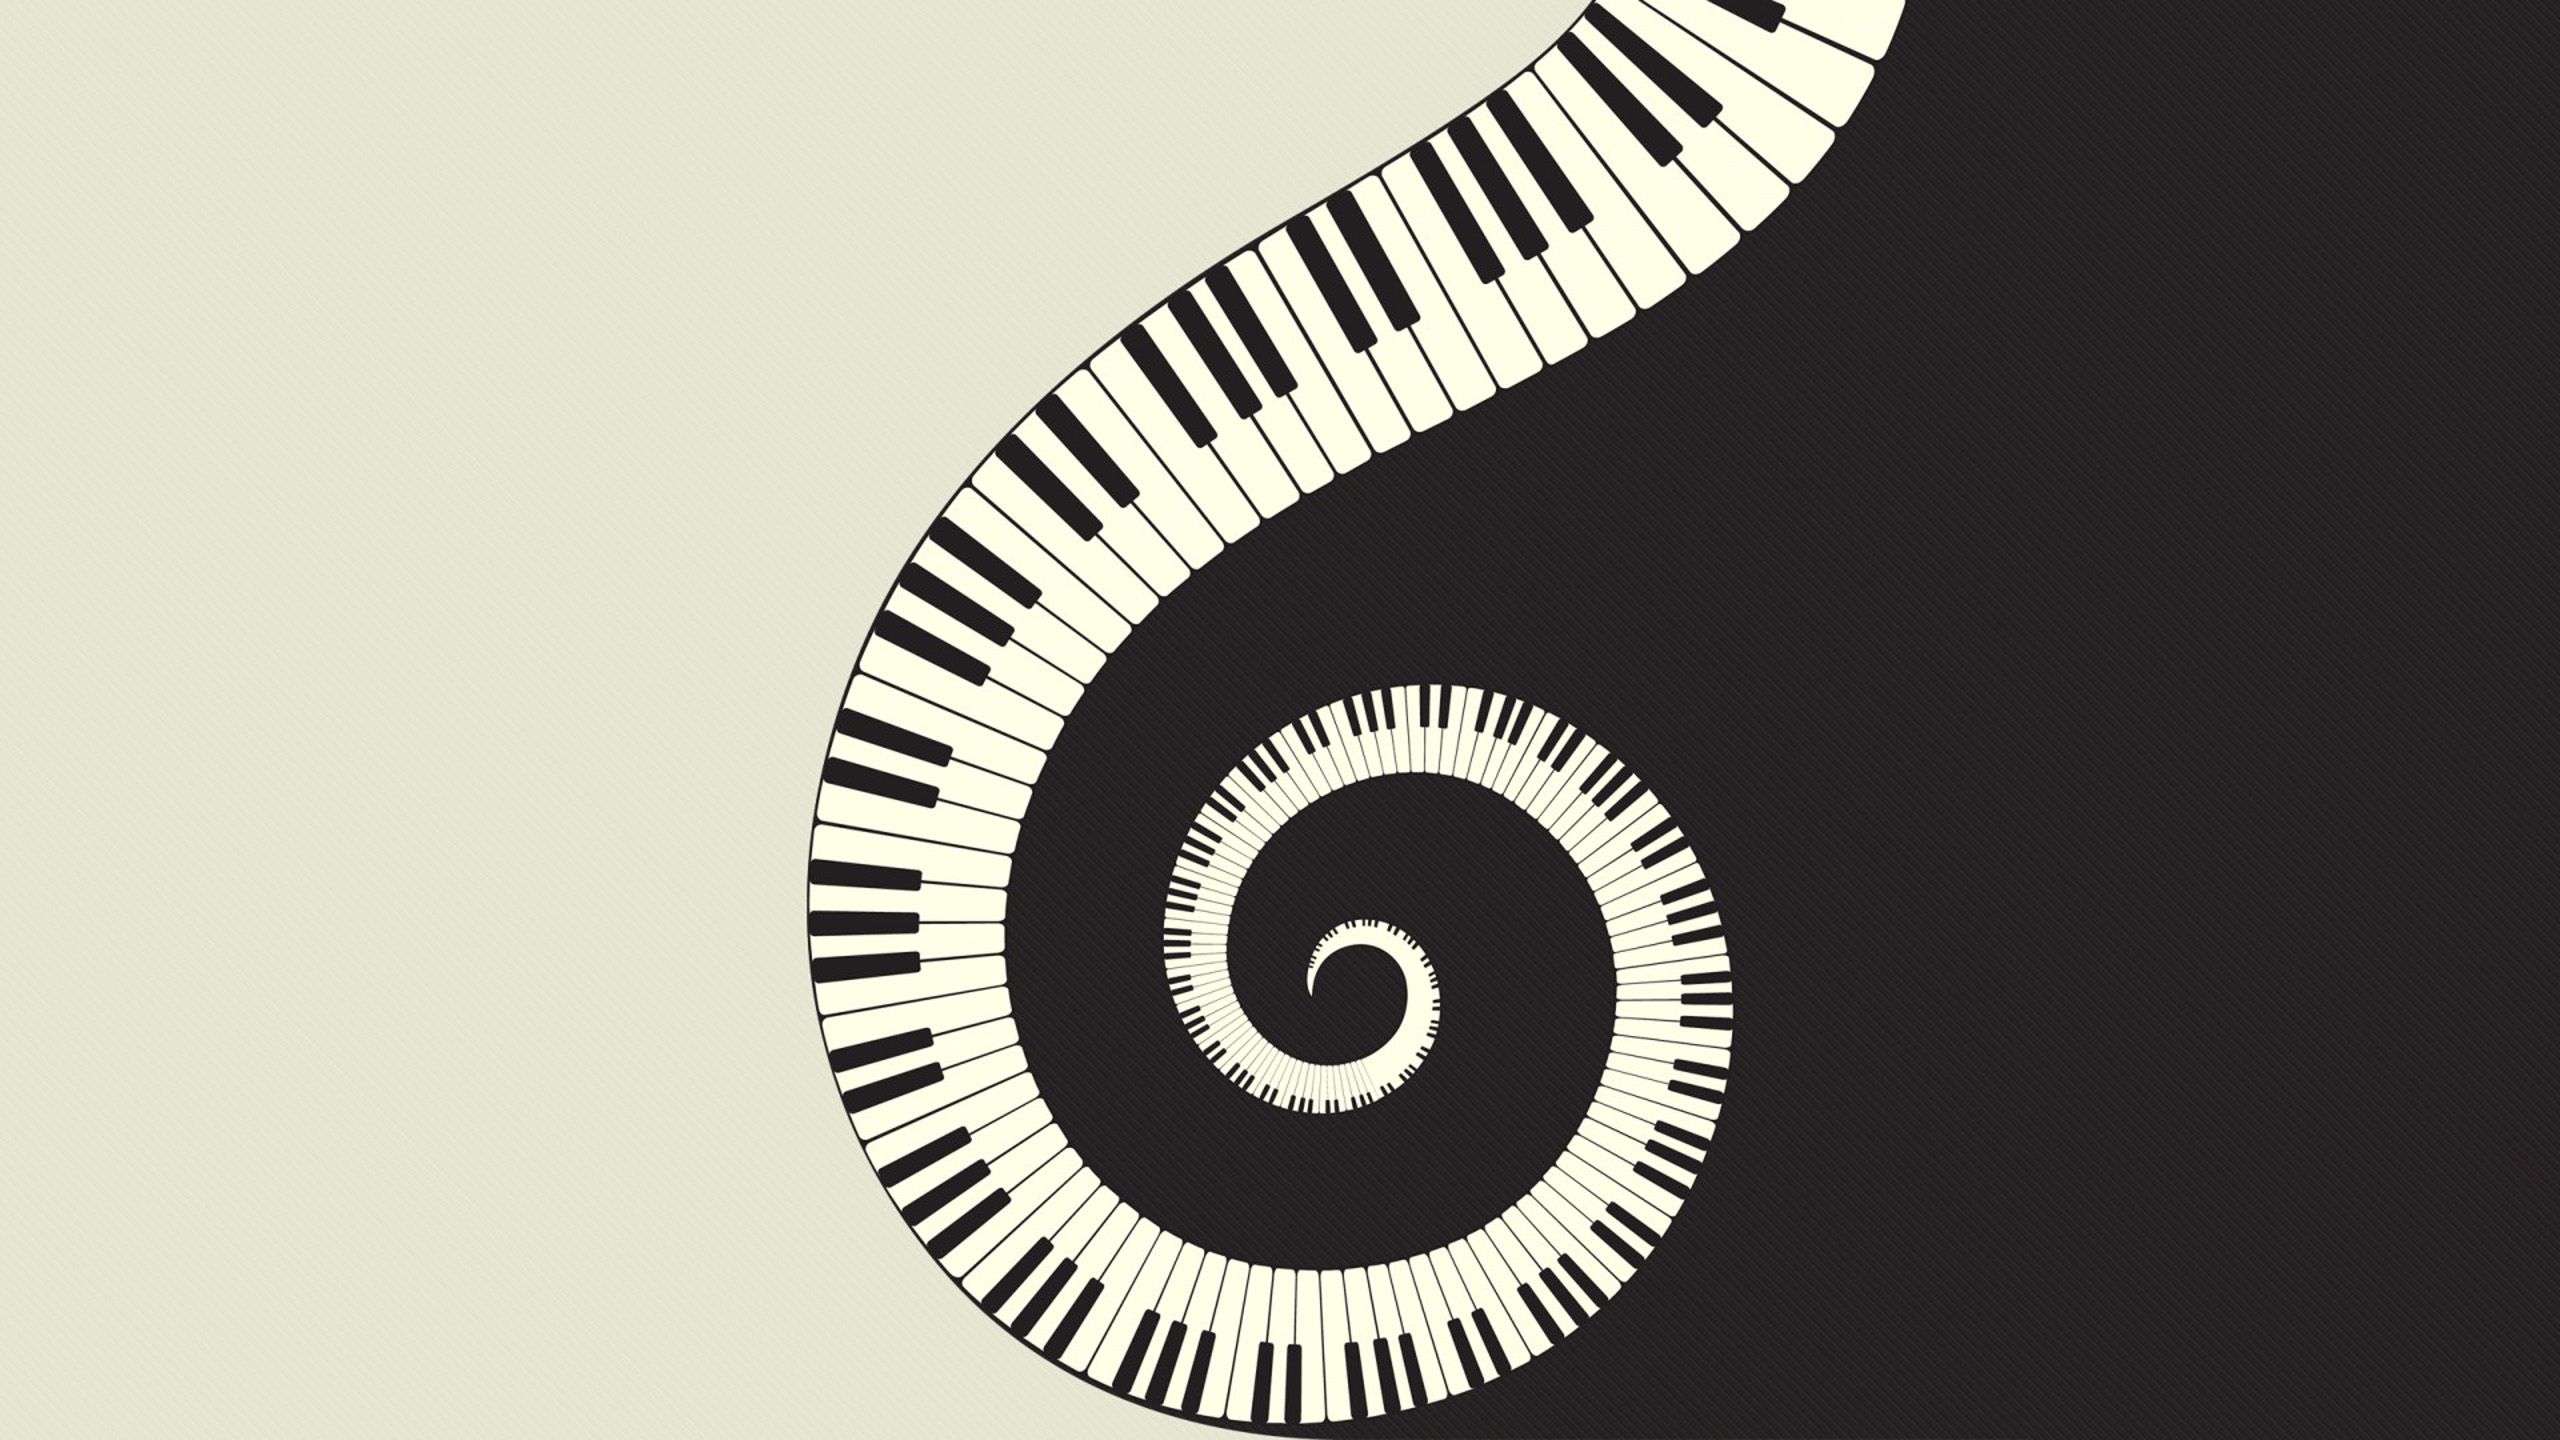 piano wallpaper for android,spiral,font,illustration,millipedes,circle